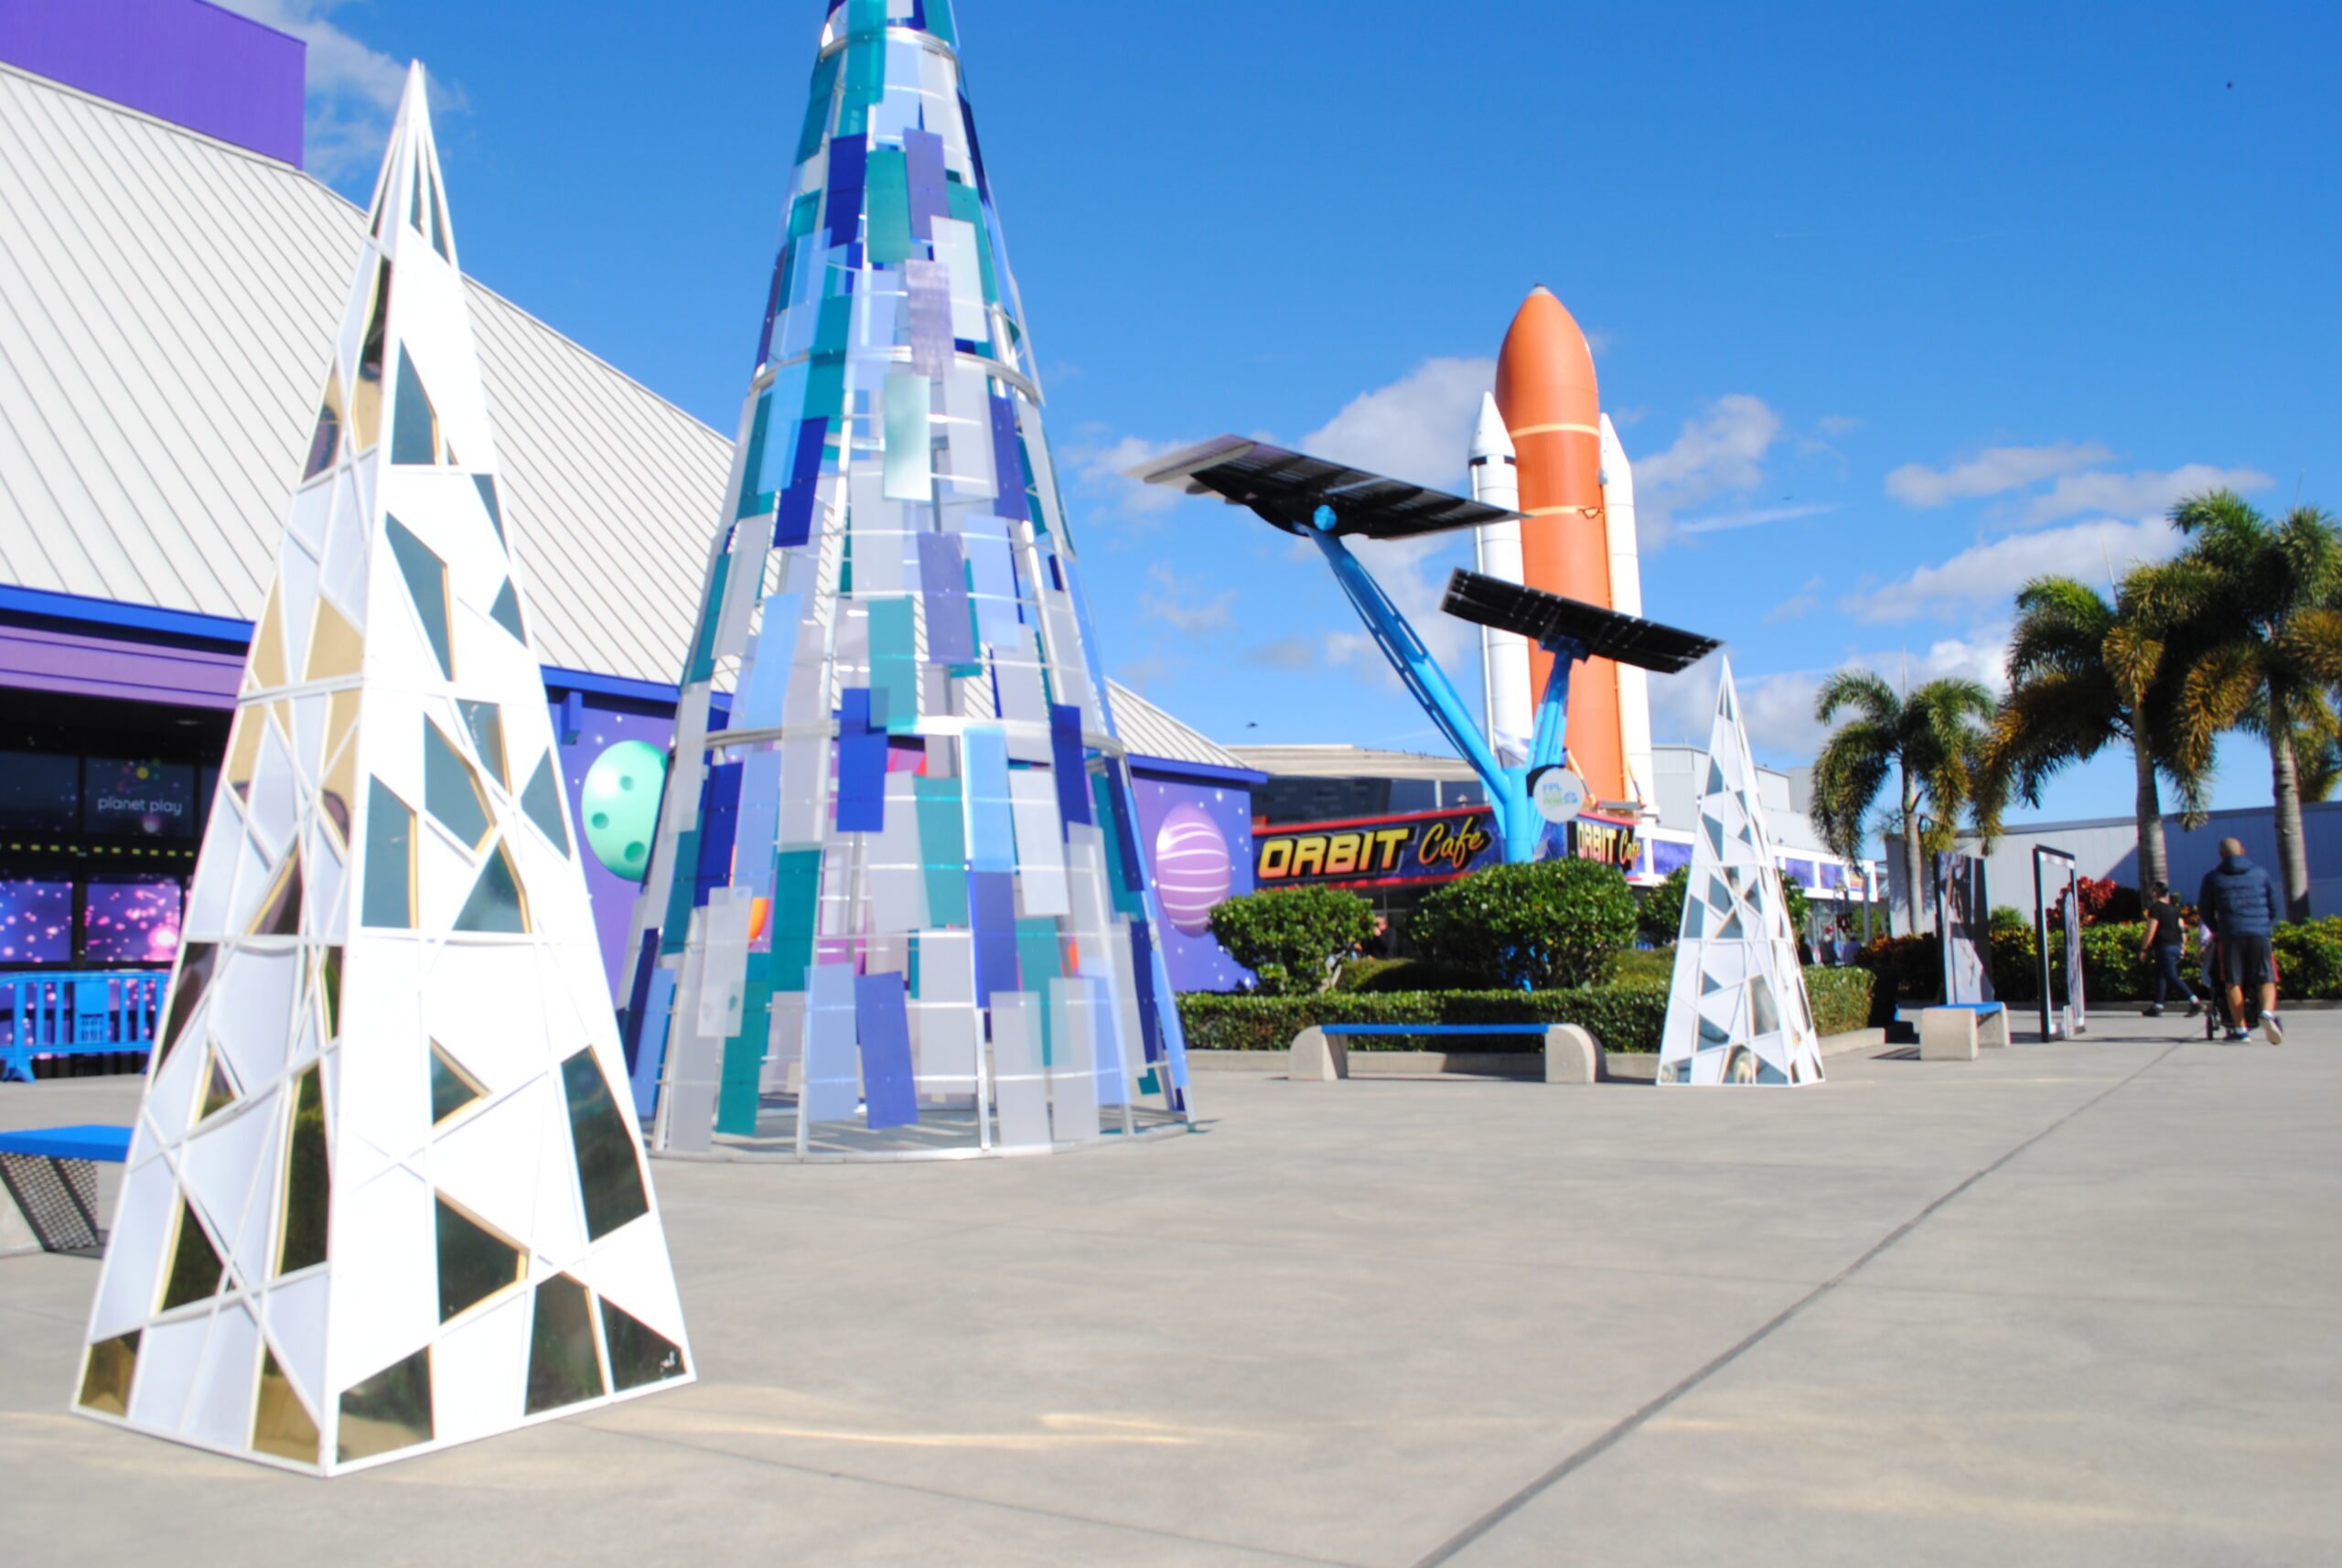 Christmas trees at Kennedy Space Center